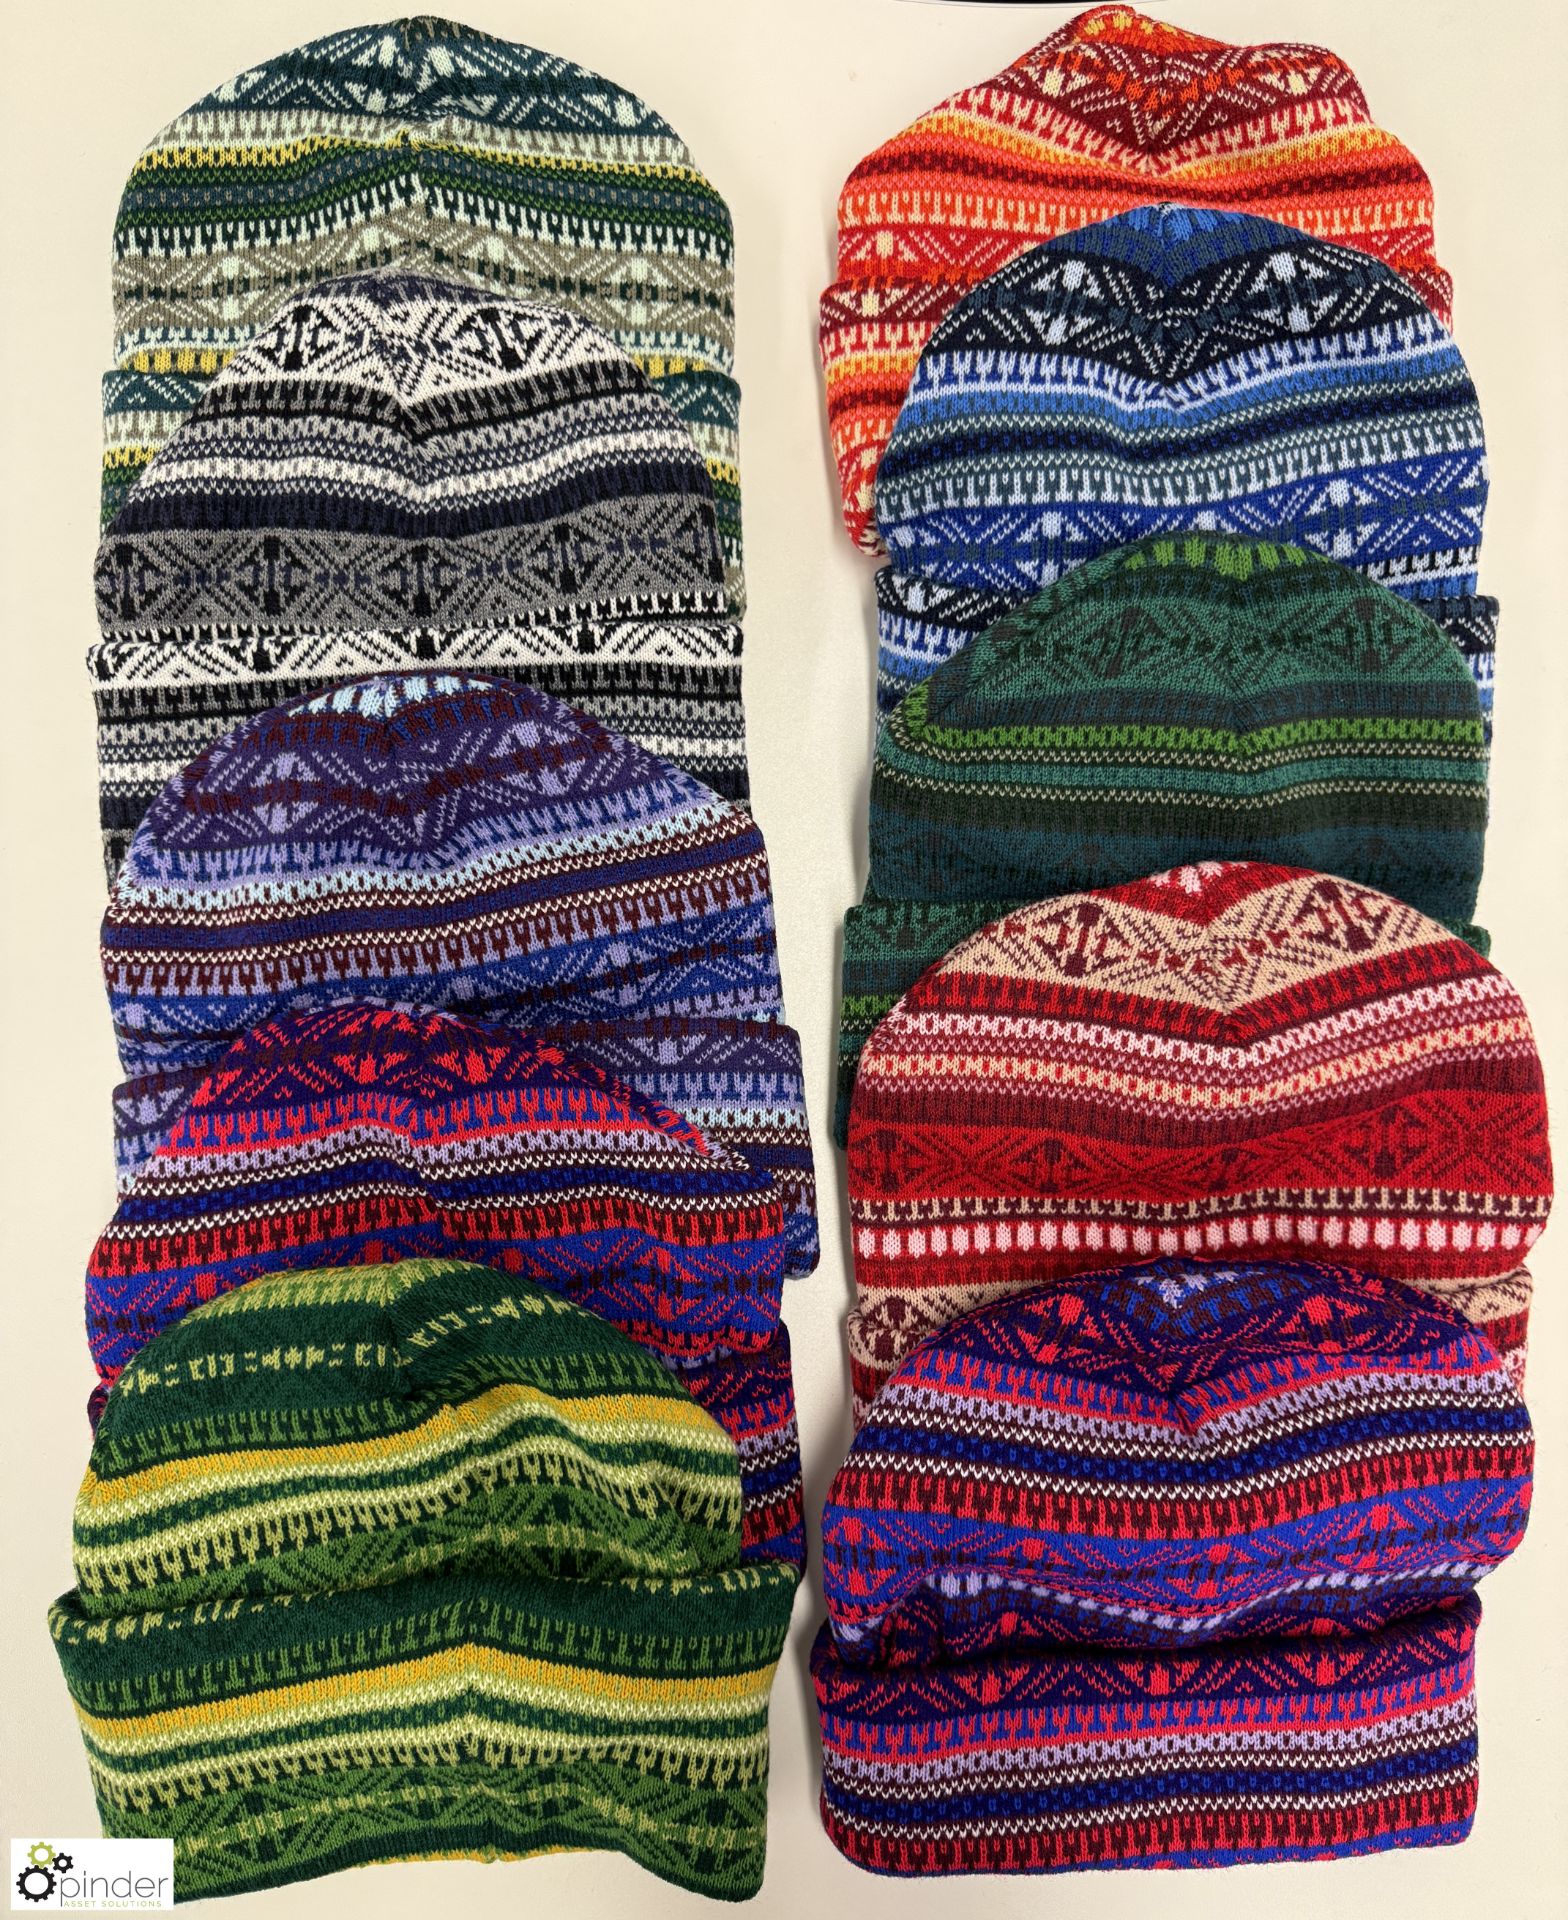 Approx. 250 acrylic multi colour chequered Beanie Hats